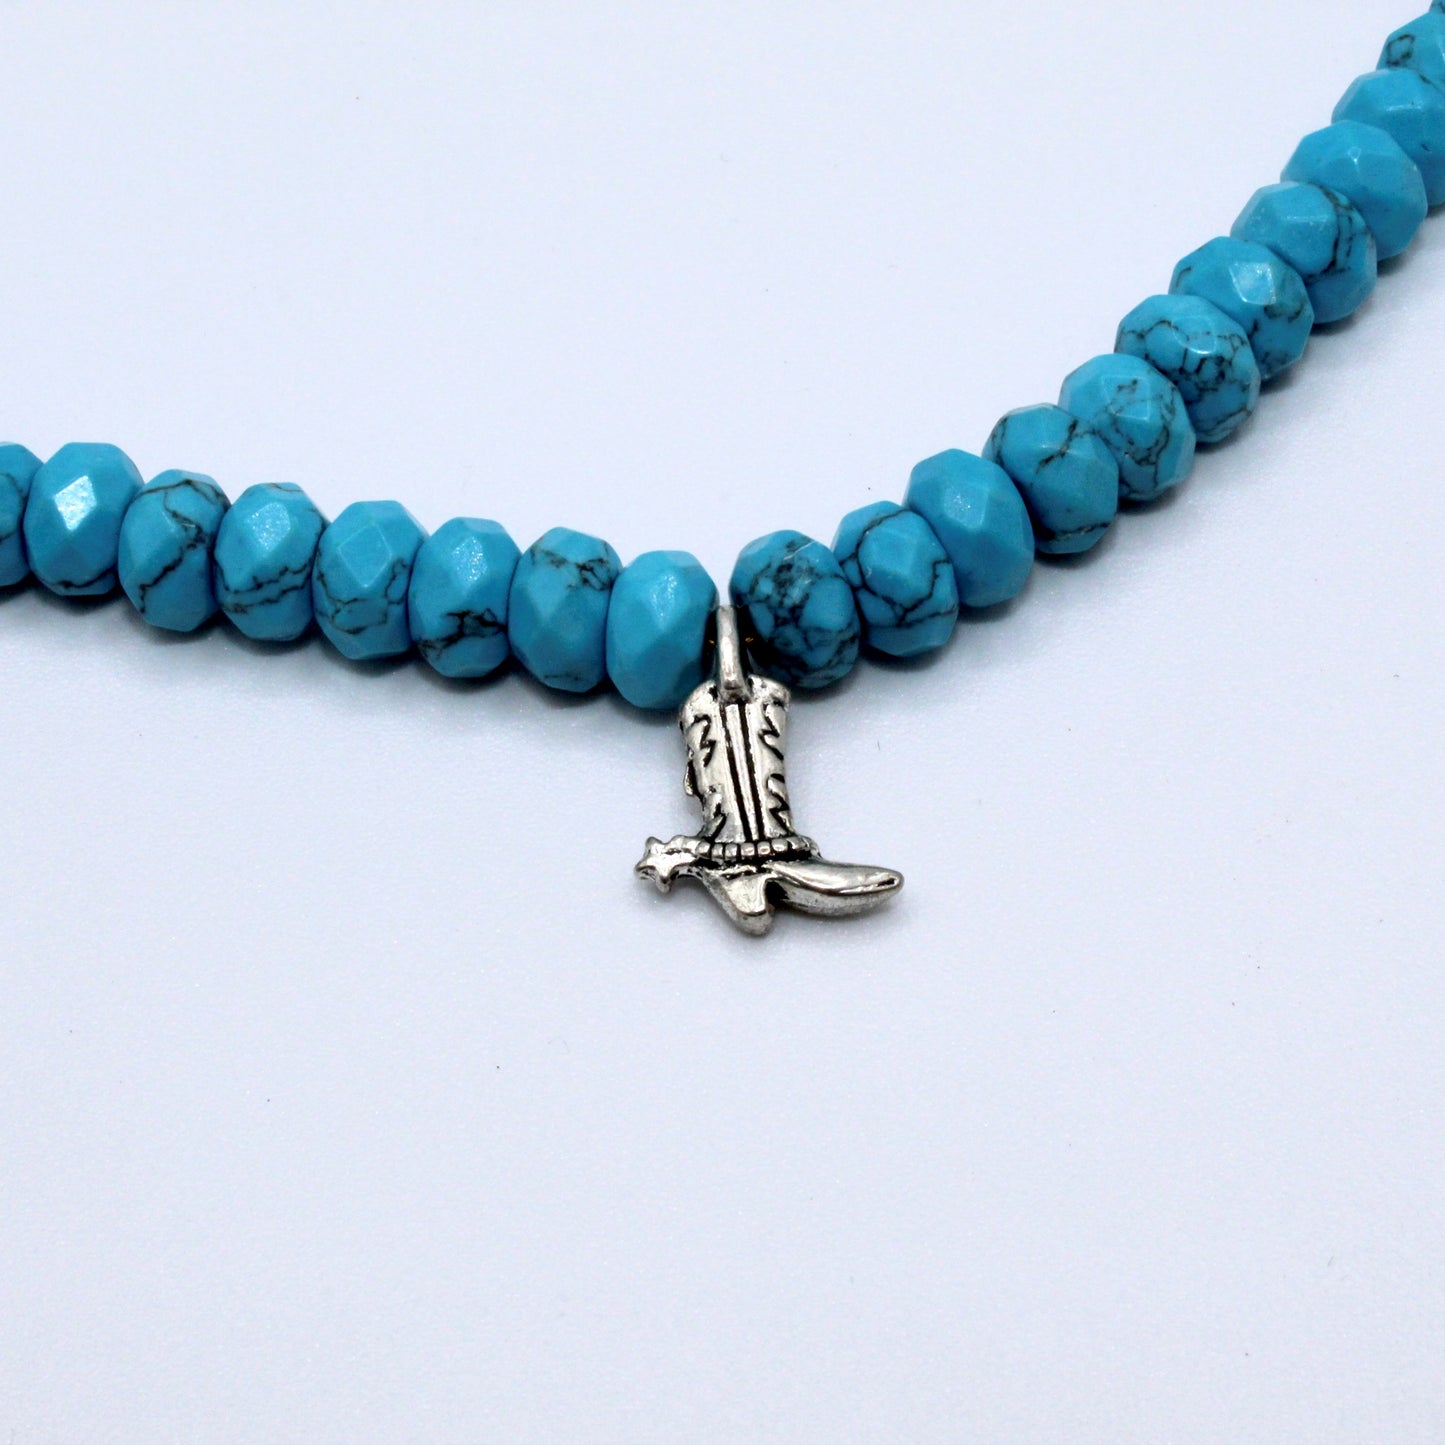 Southern James Necklace with Boot Charm -Turquoise